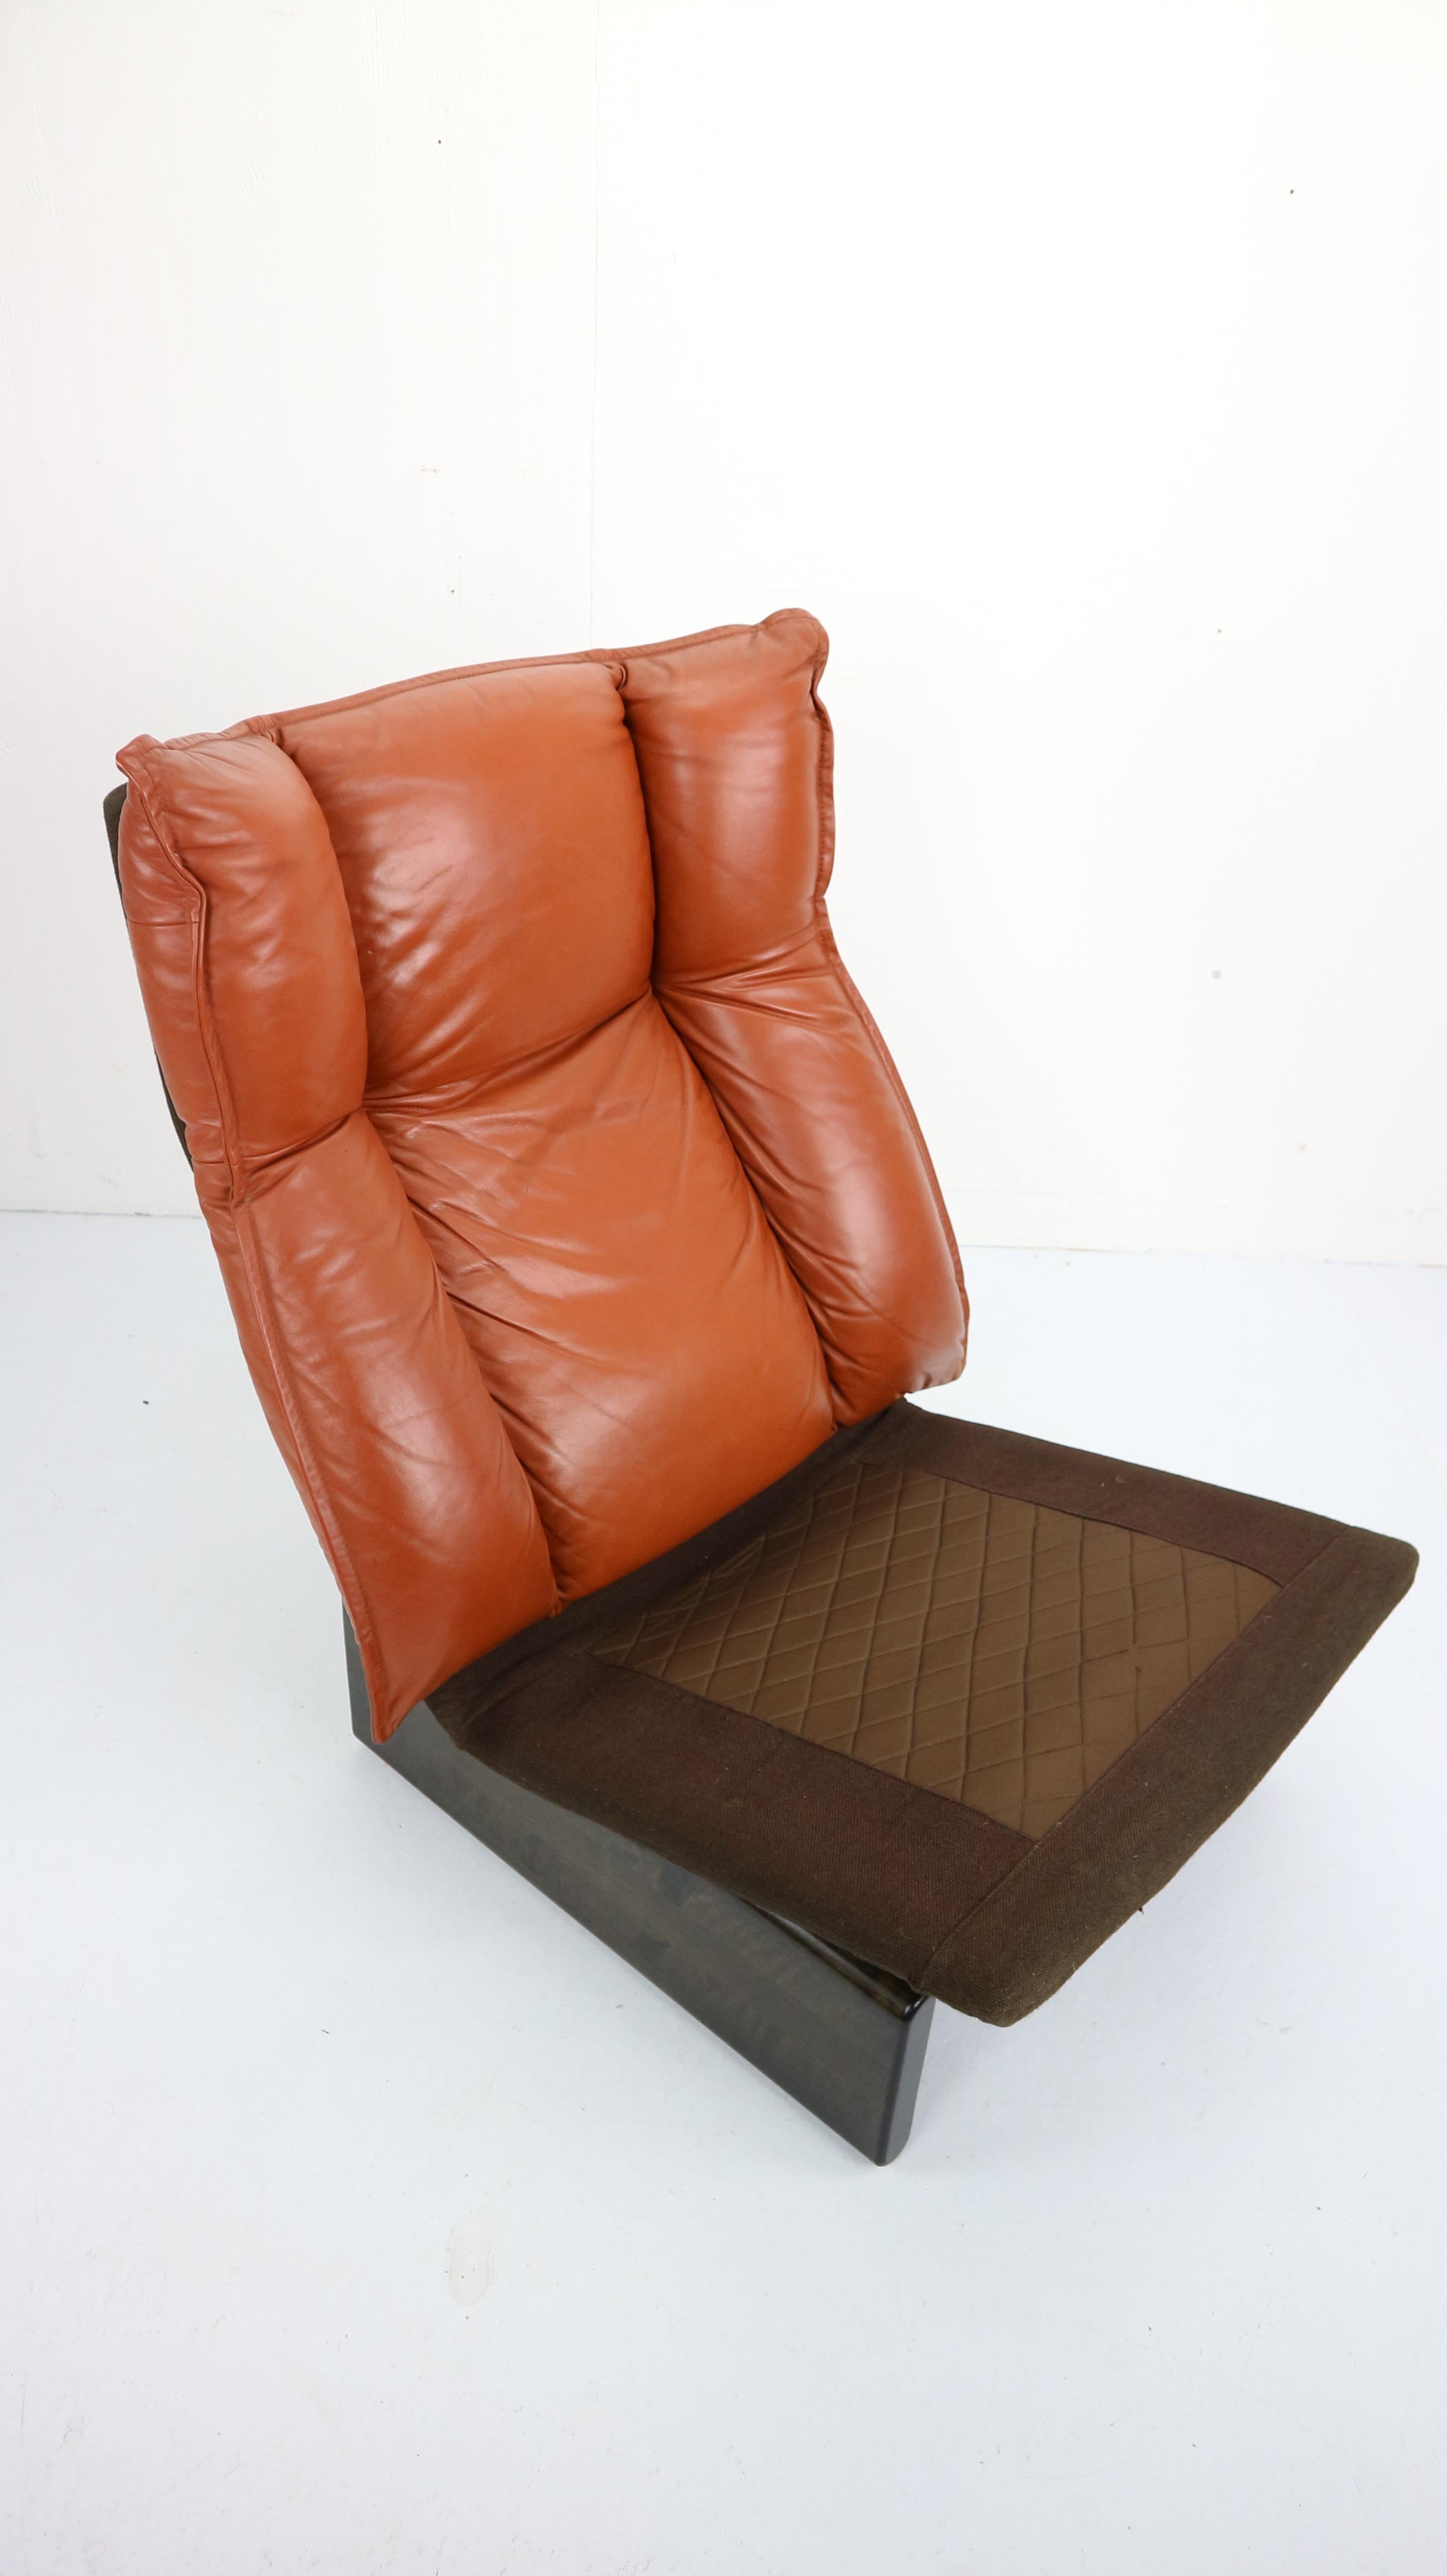 Cognac Leather and Wood Lounge Chair, Dutch Modern Design, 1970s 4